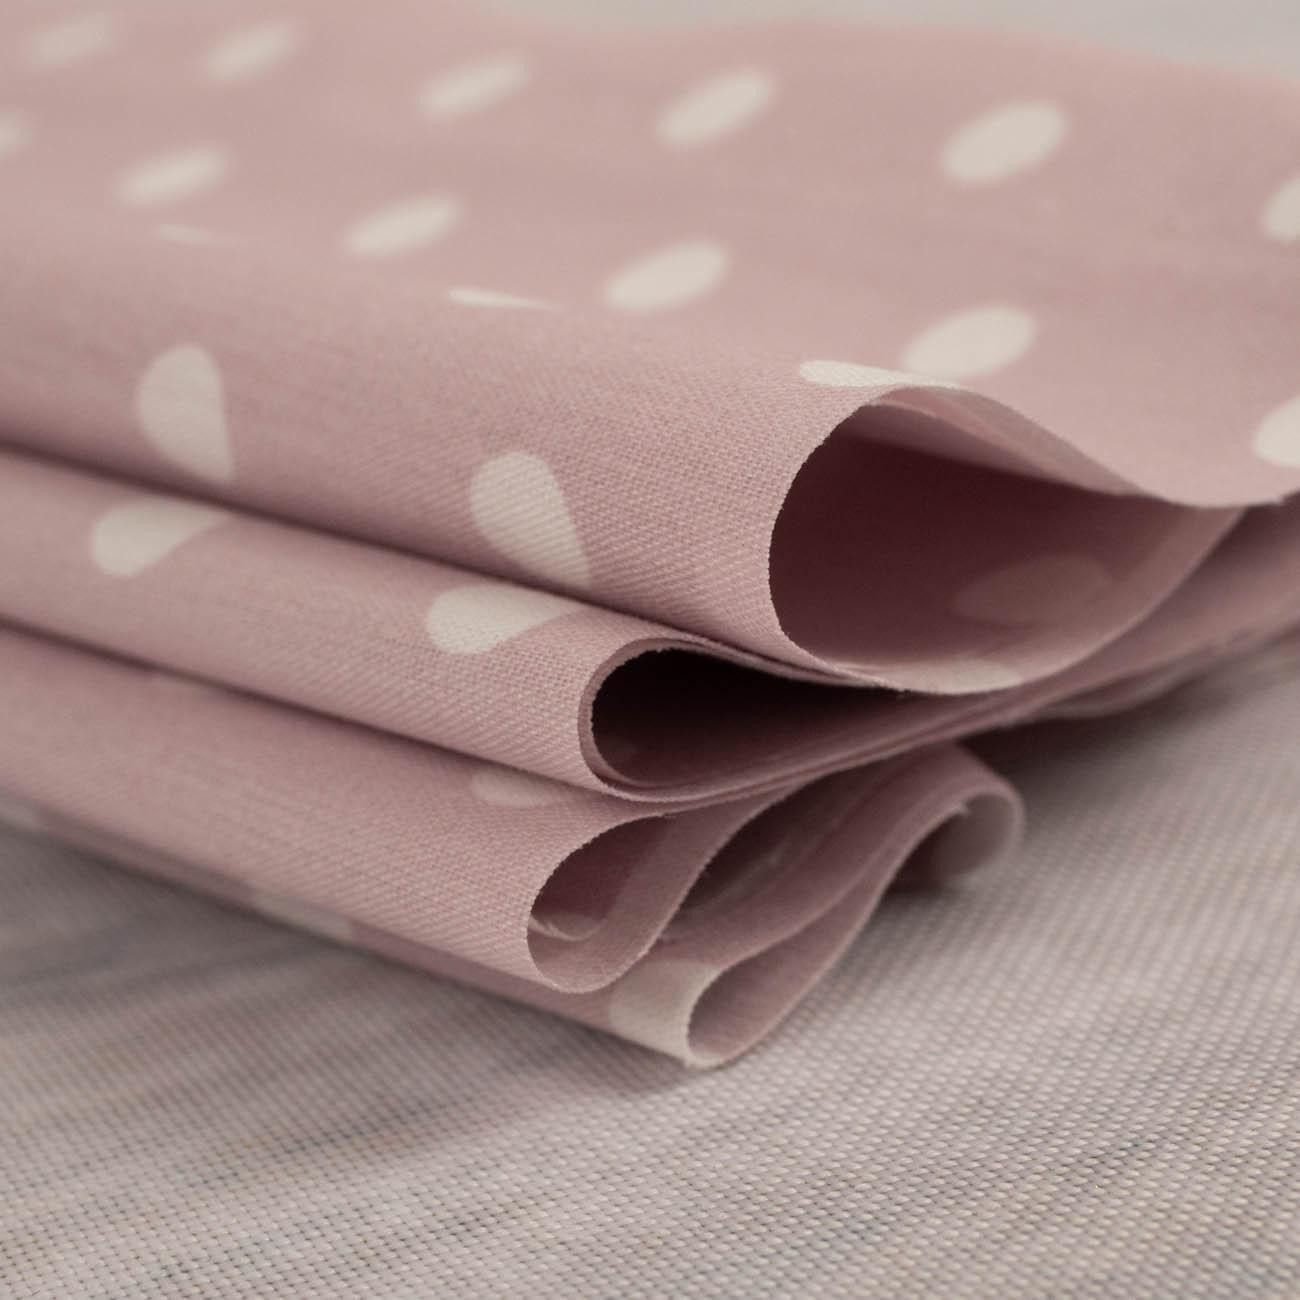 WHITE PEAS / DIRTY PINK - Cotton woven fabric